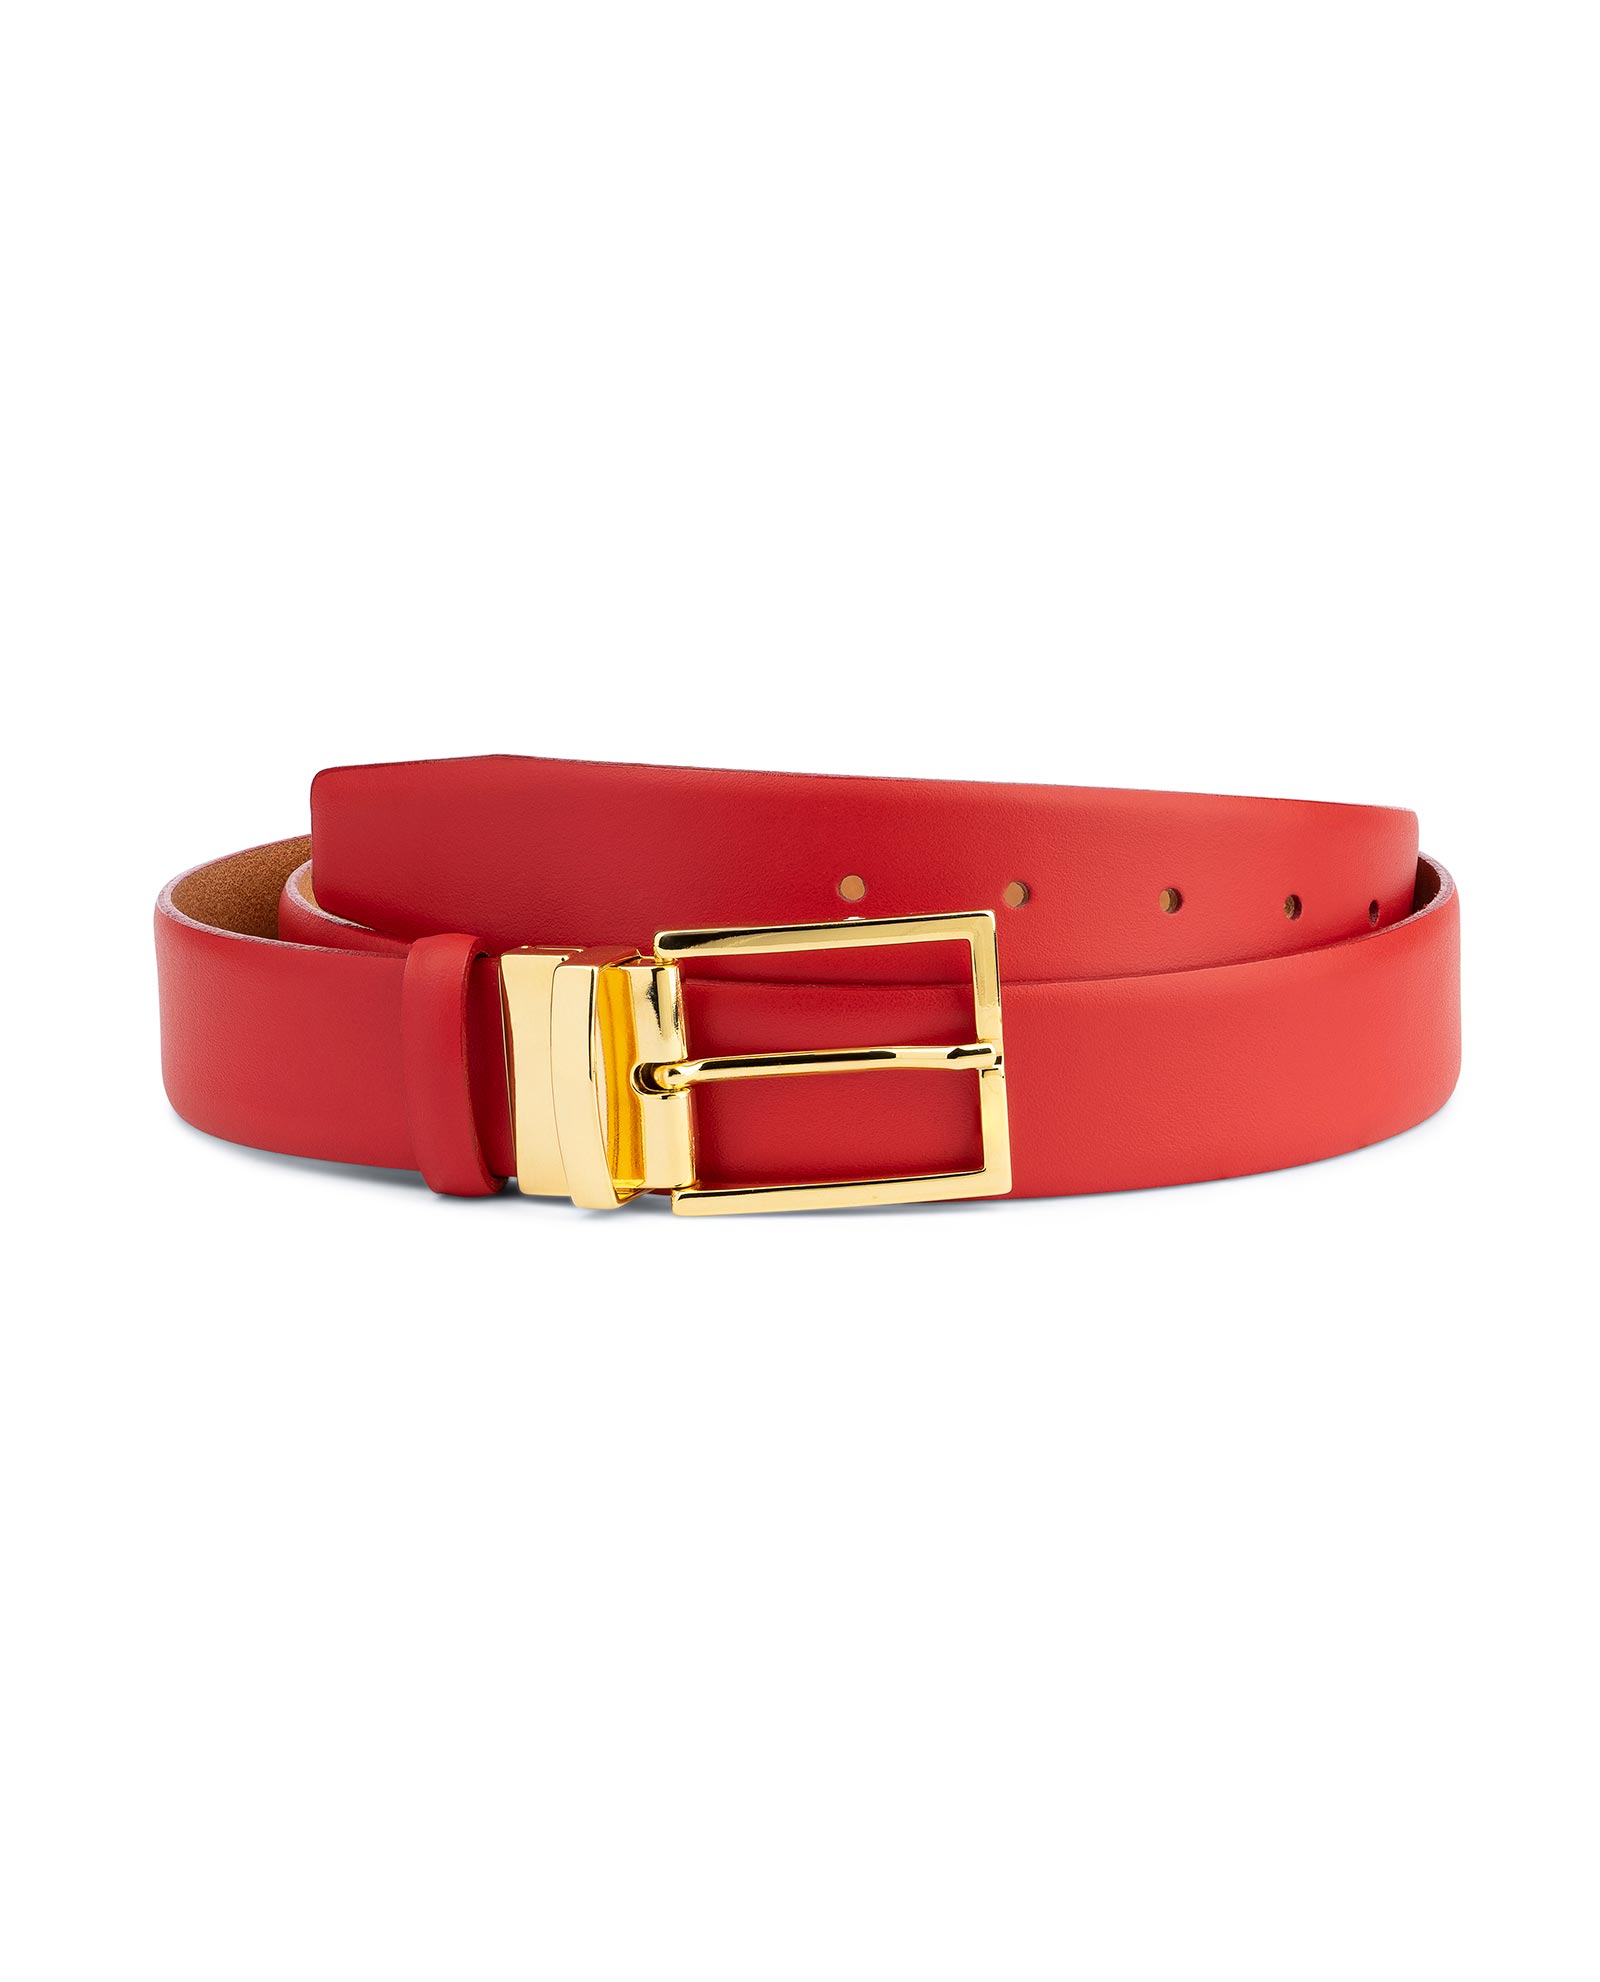 Men's Red Belt with Gold Buckle 40 / 100 cm - Red | Capo Pelle